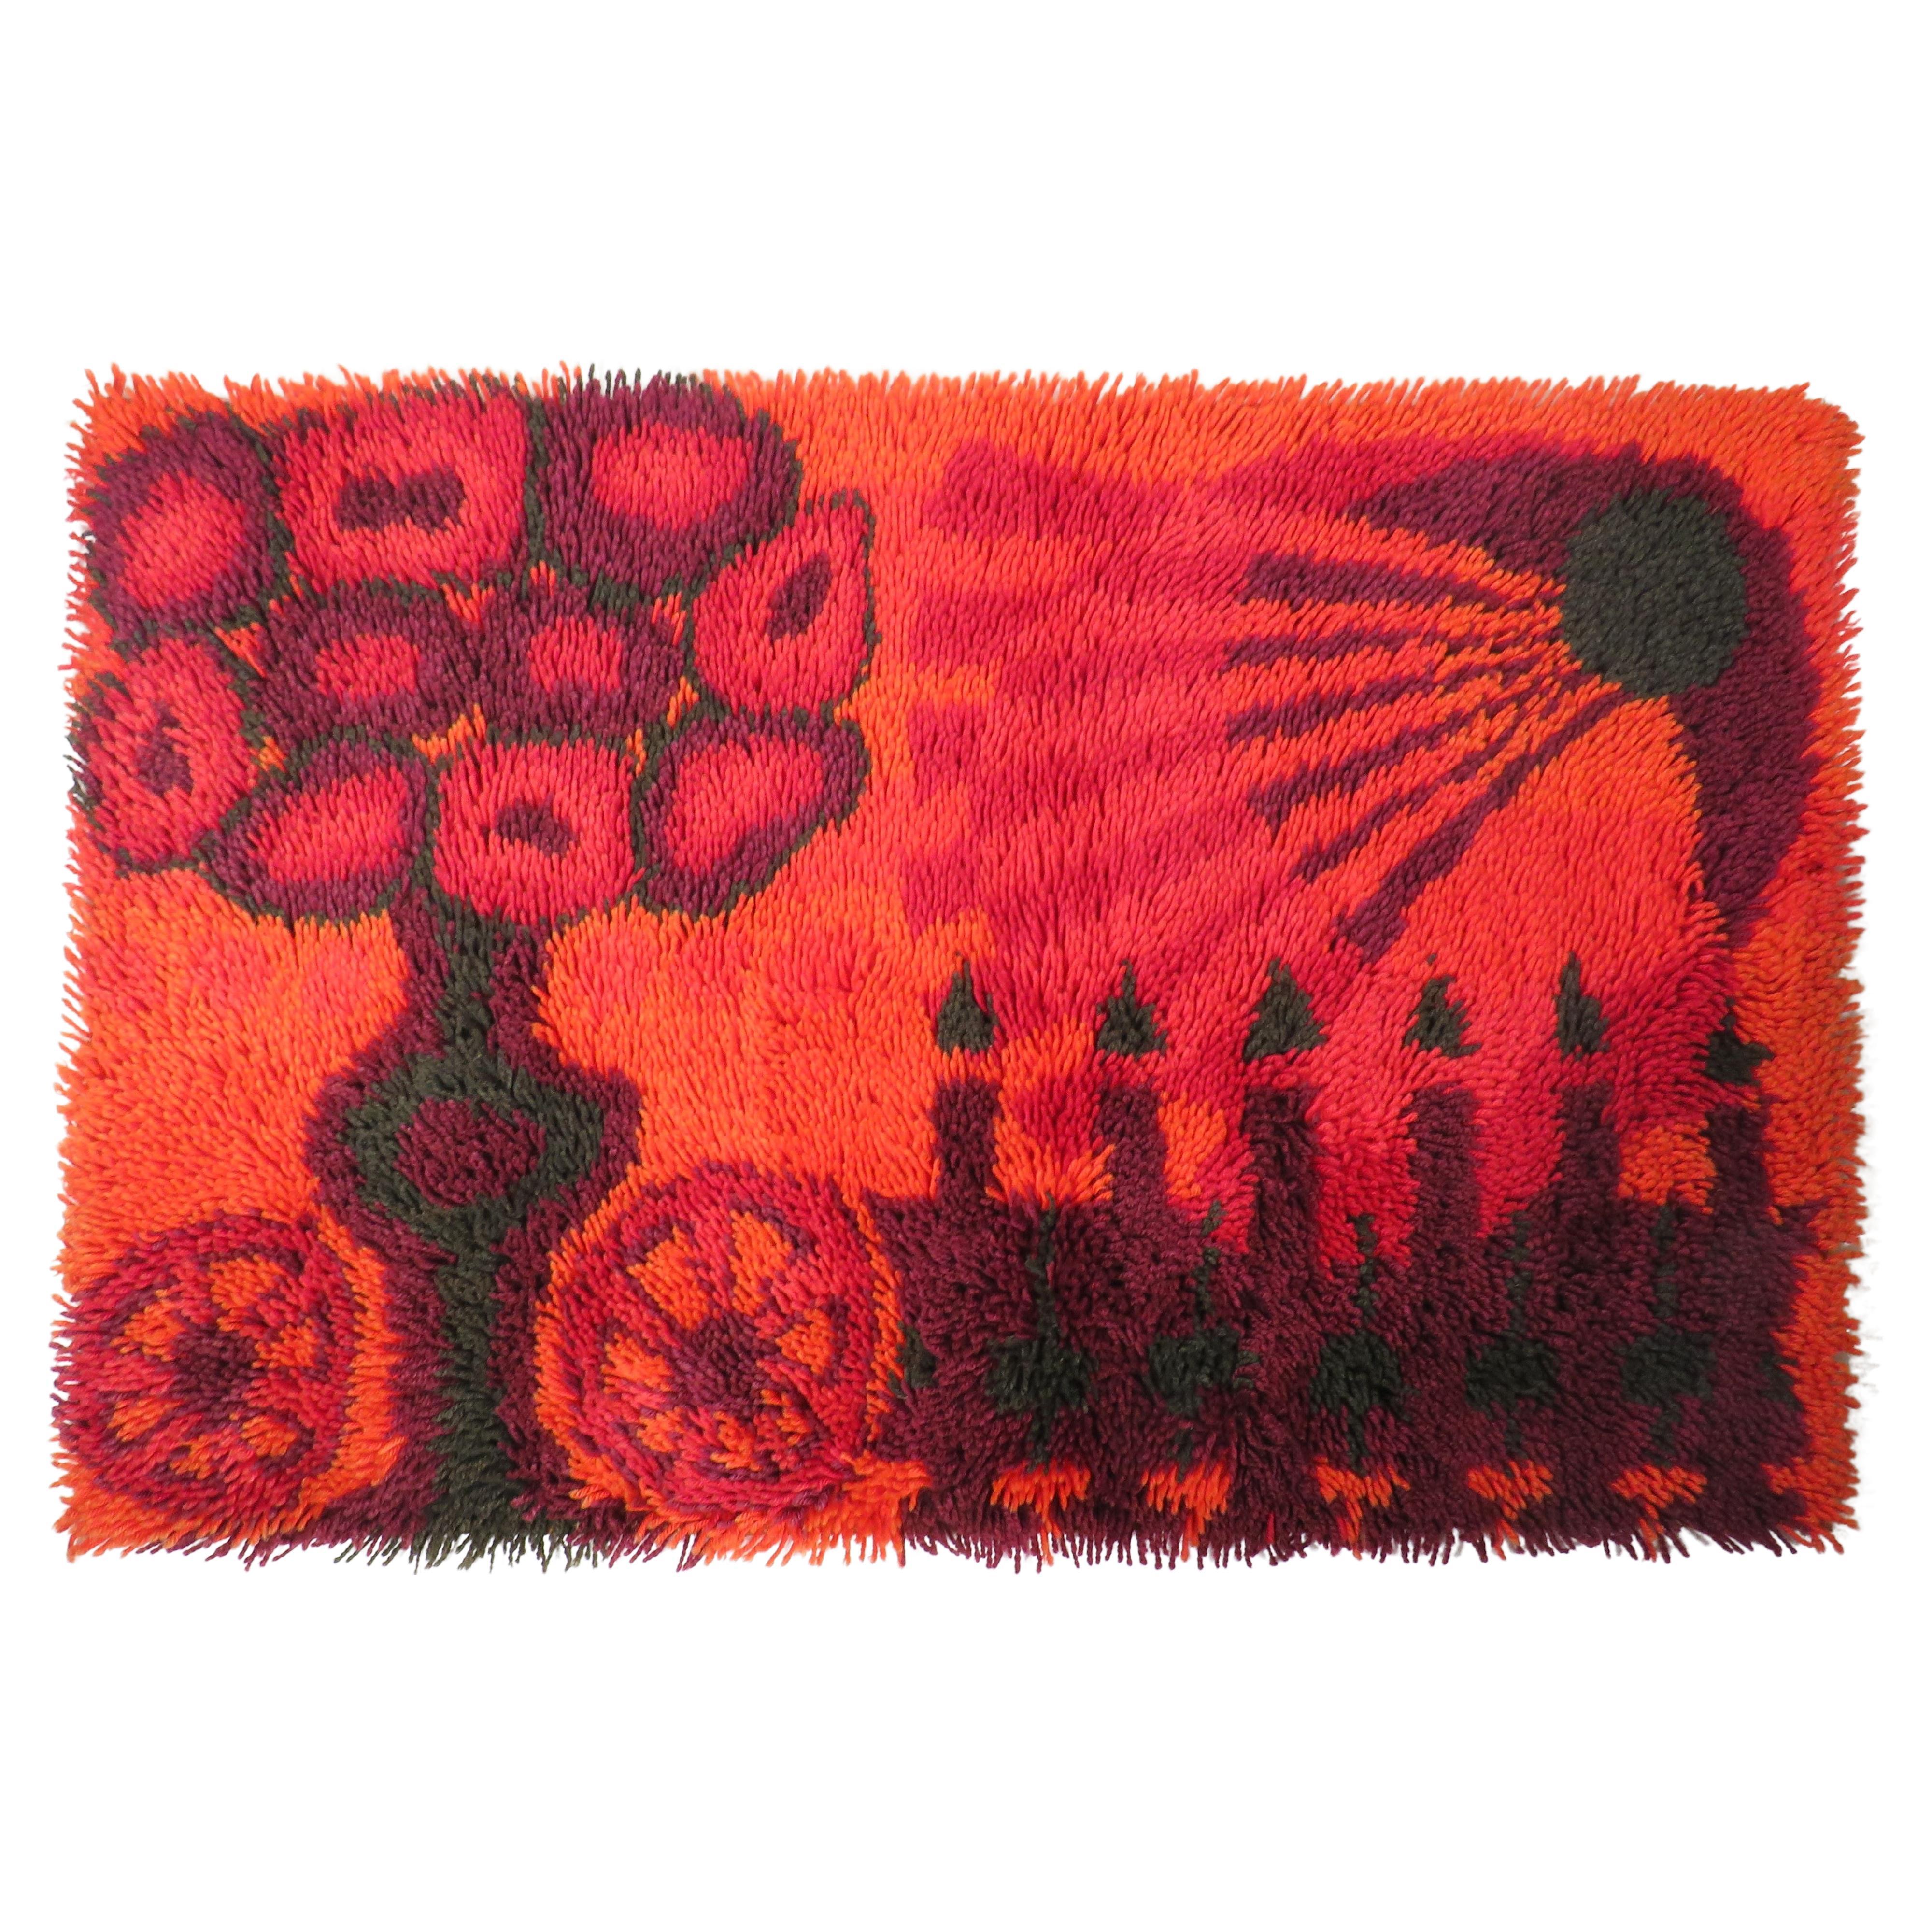 Rug or Wall Tapestry by Ege Rya, Denmark 1965 For Sale